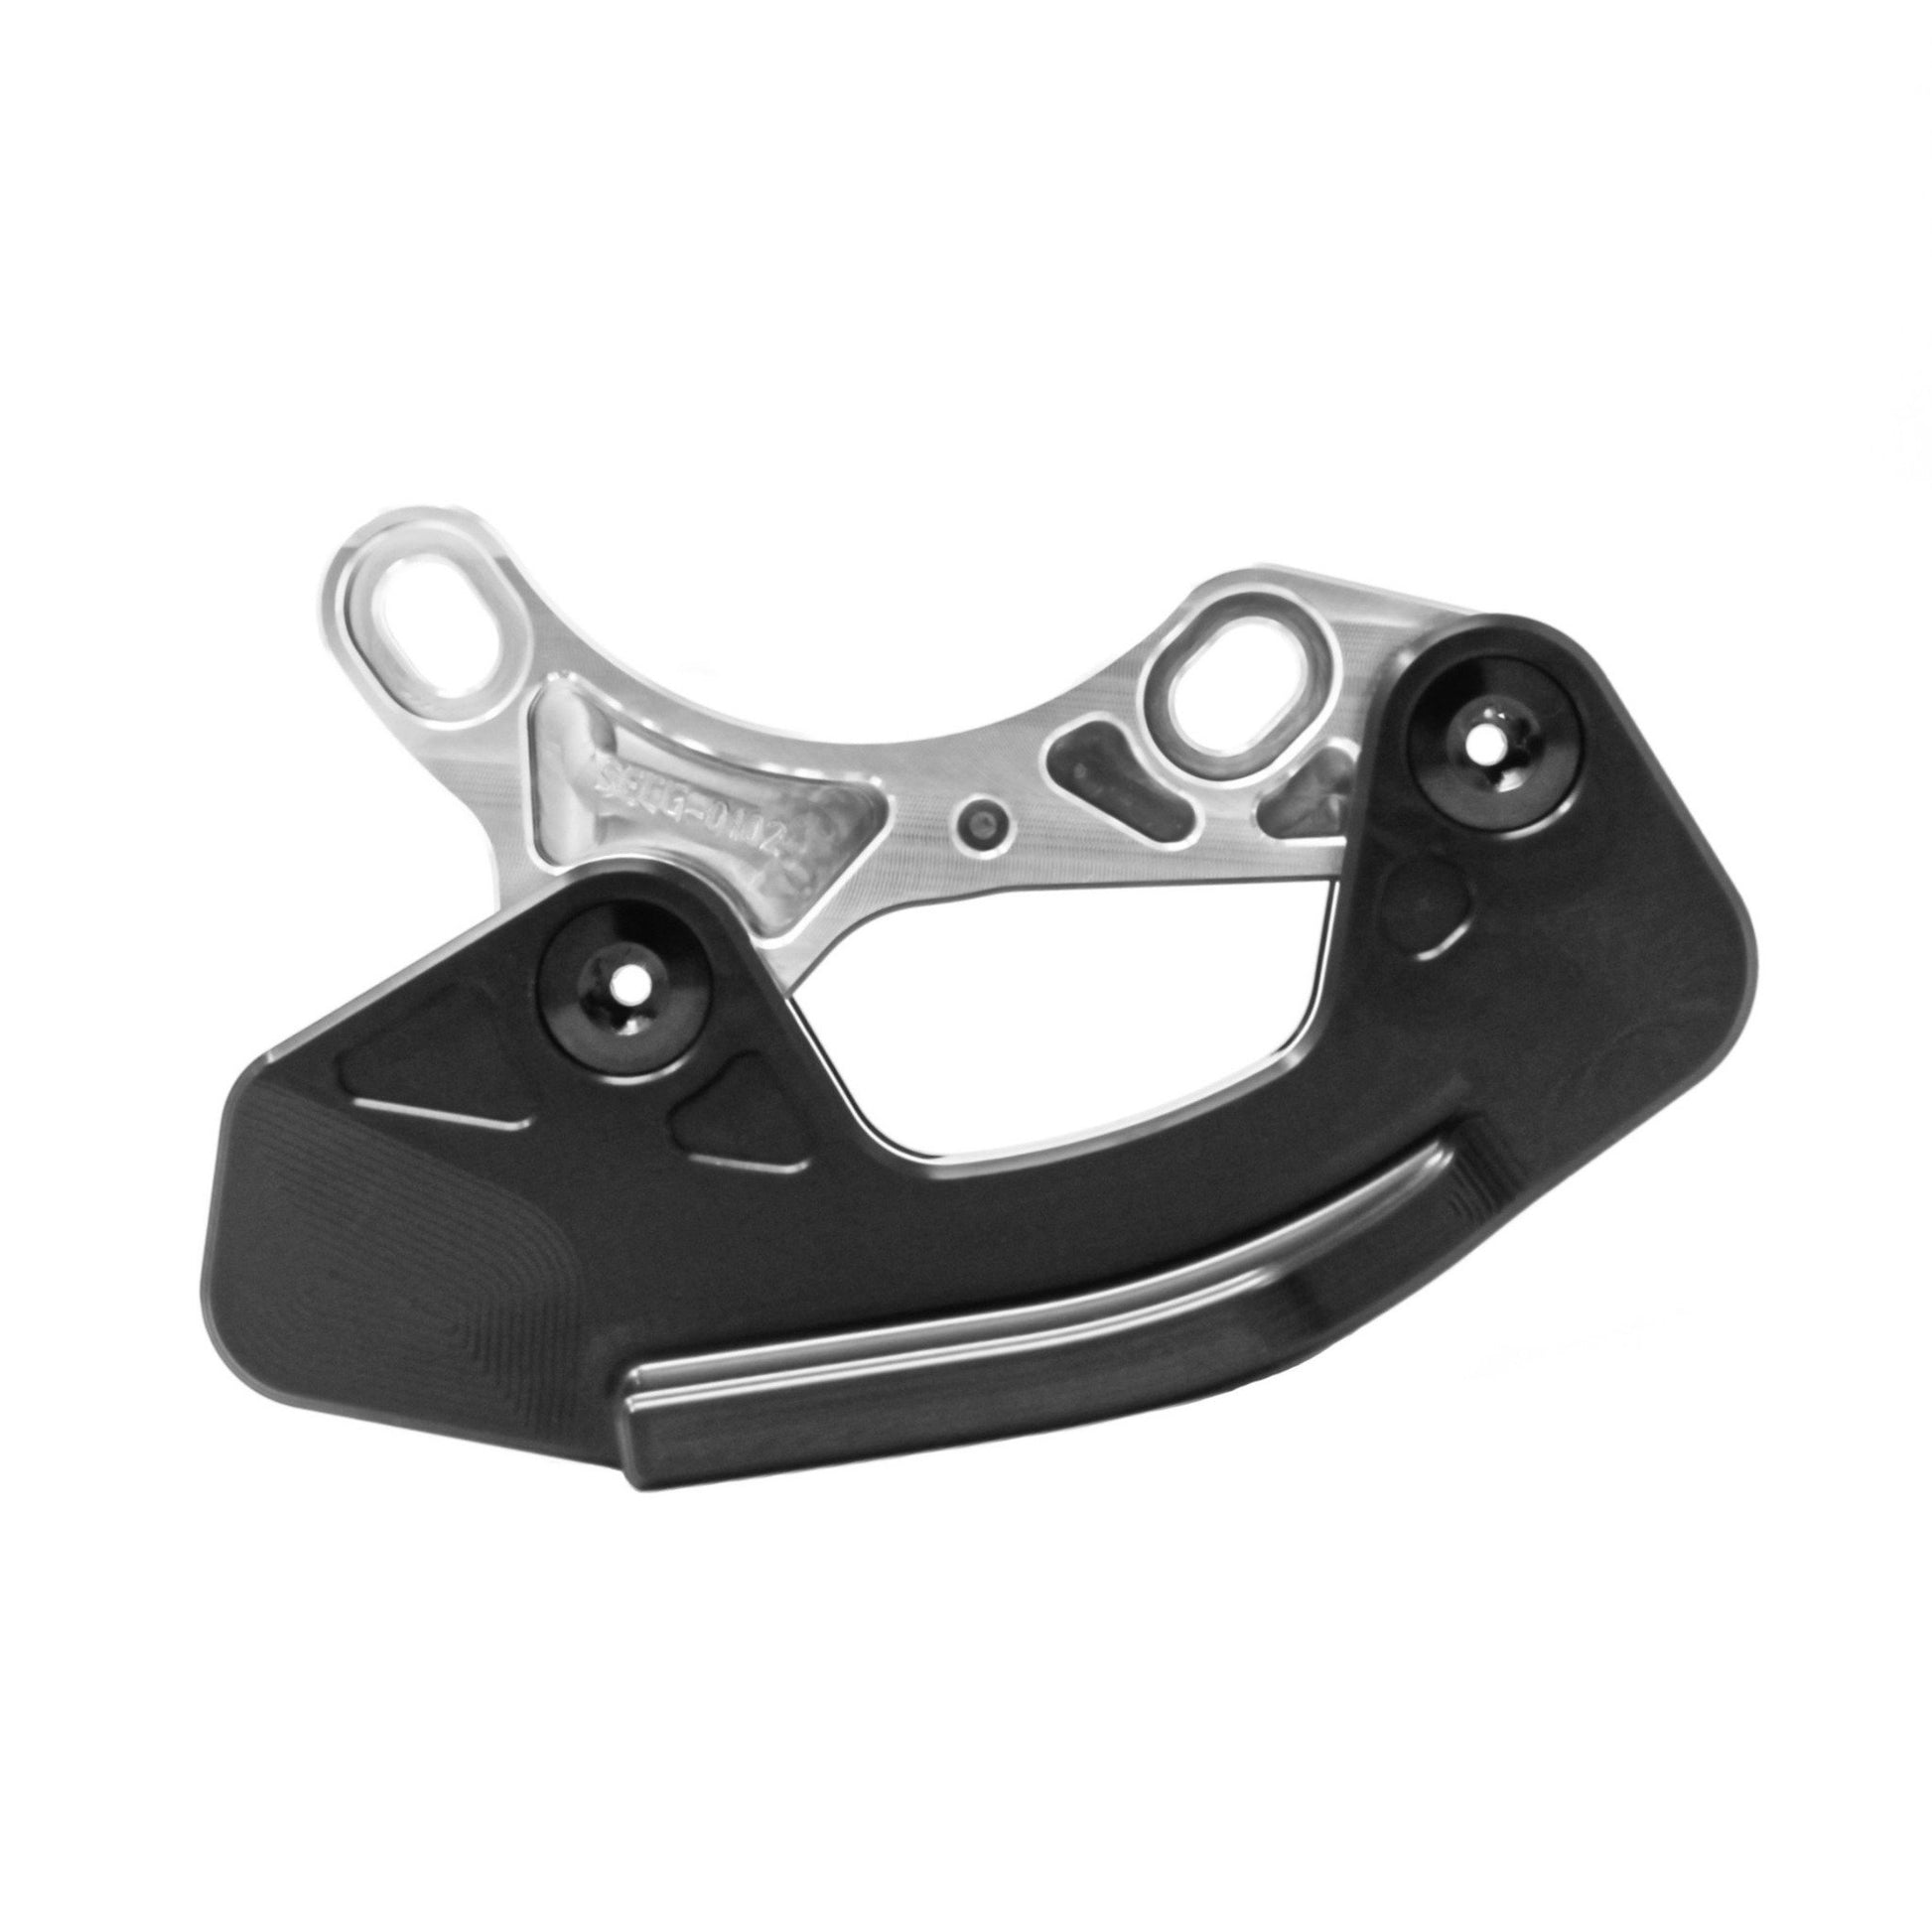 ISCG 05 Lower Chain Guide 32 Tooth Product